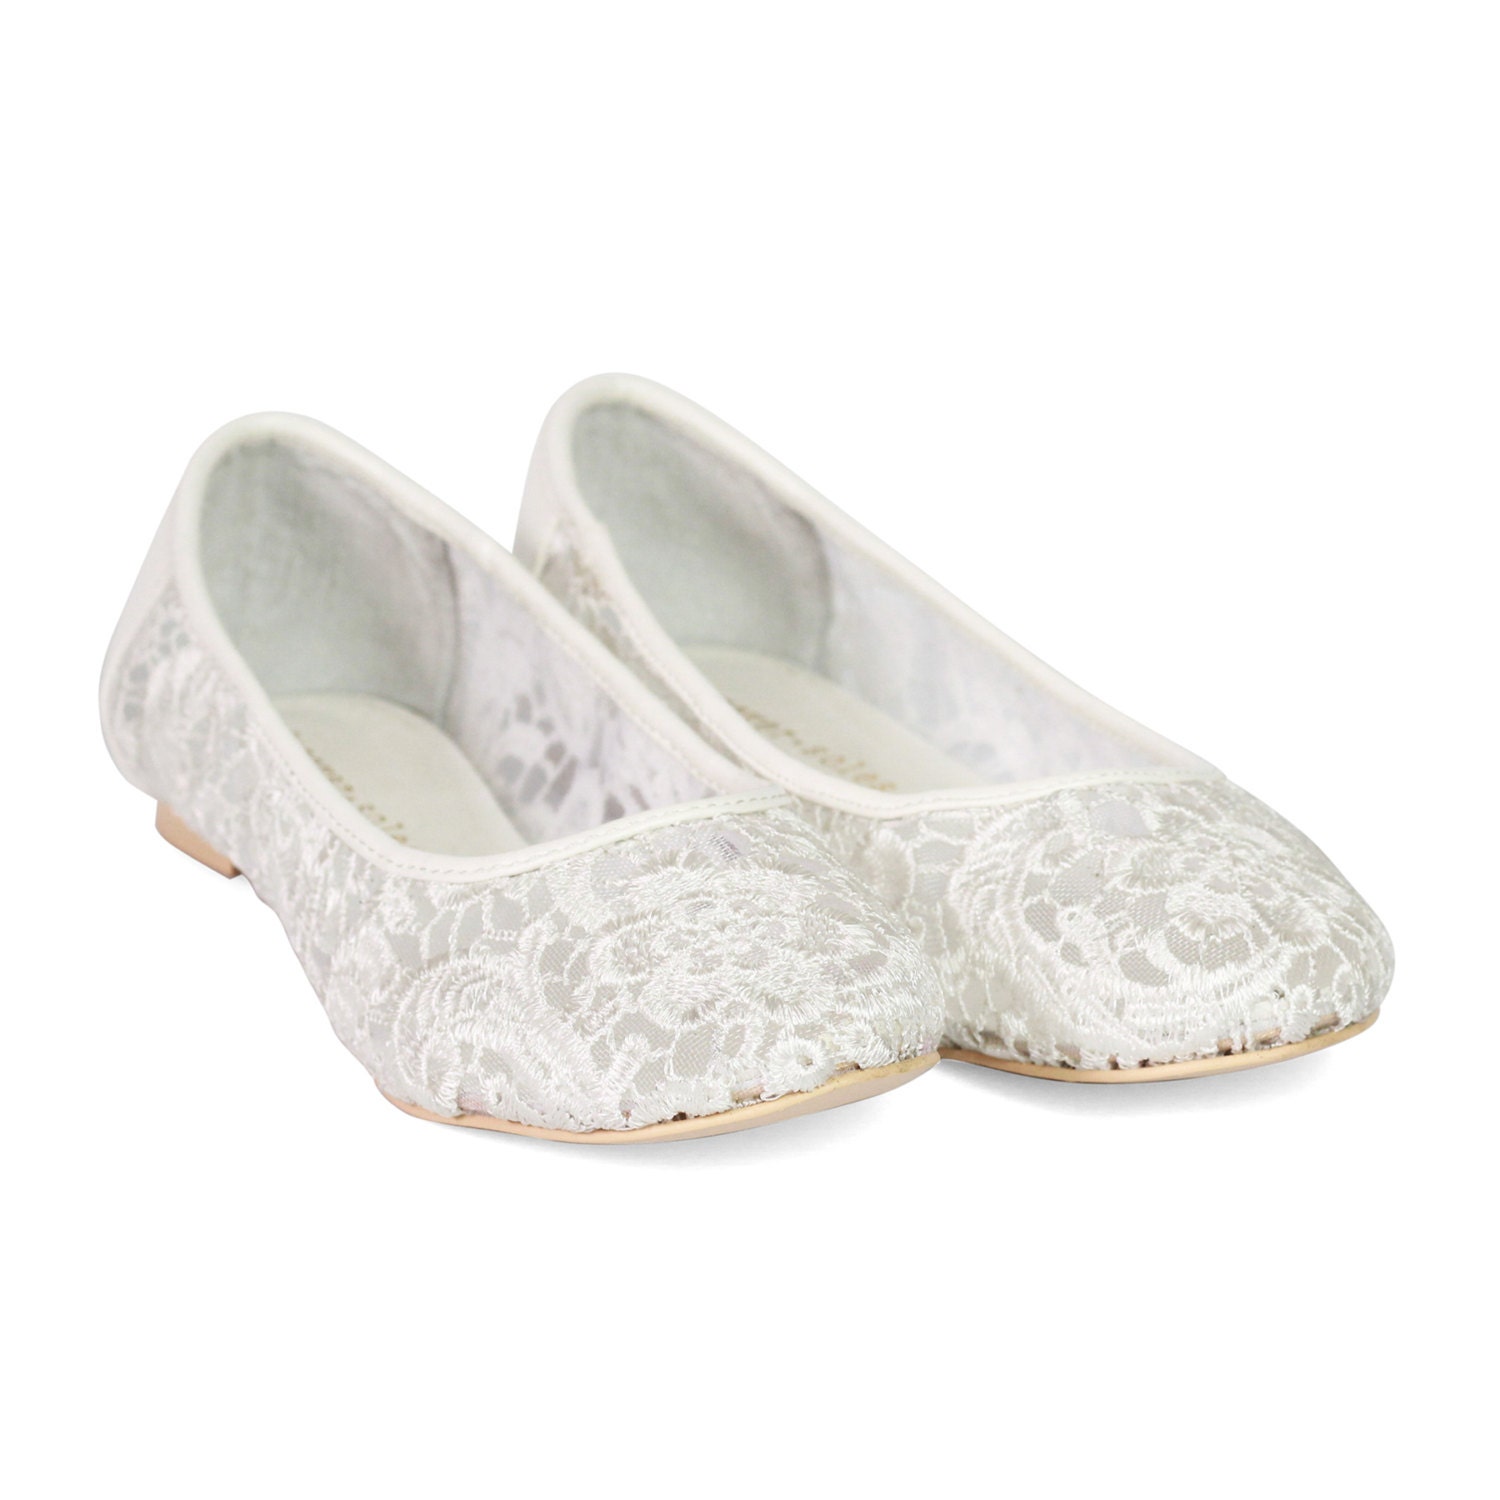 Ladies wedding ballet flat shoes with ivory lace flowers - Style ...